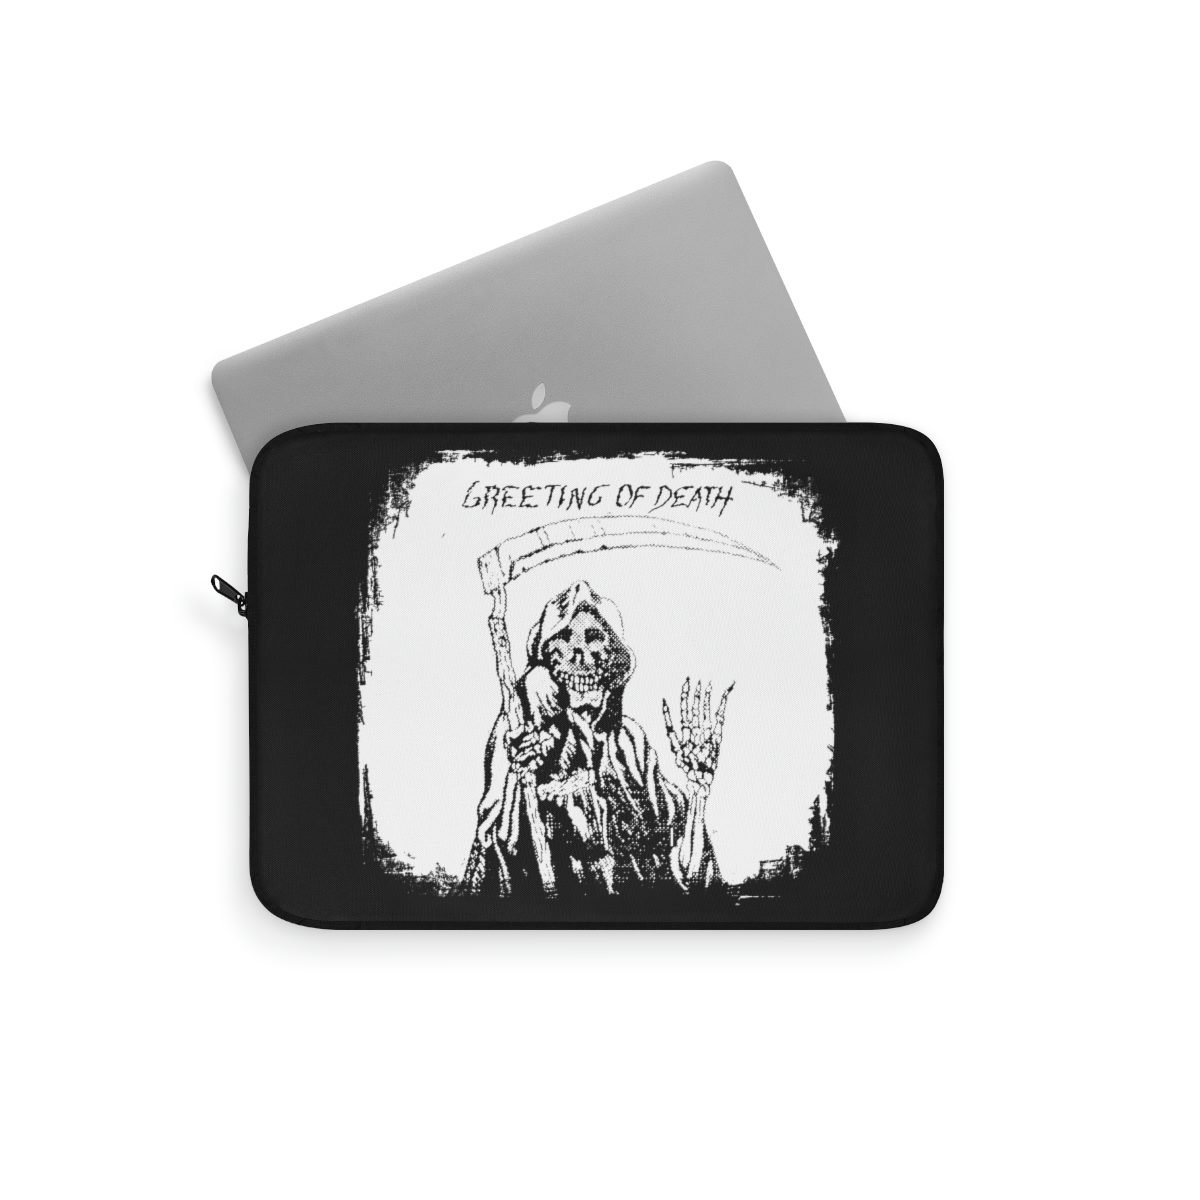 Deliverance – Greeting of Death Laptop Sleeves (3 sizes)